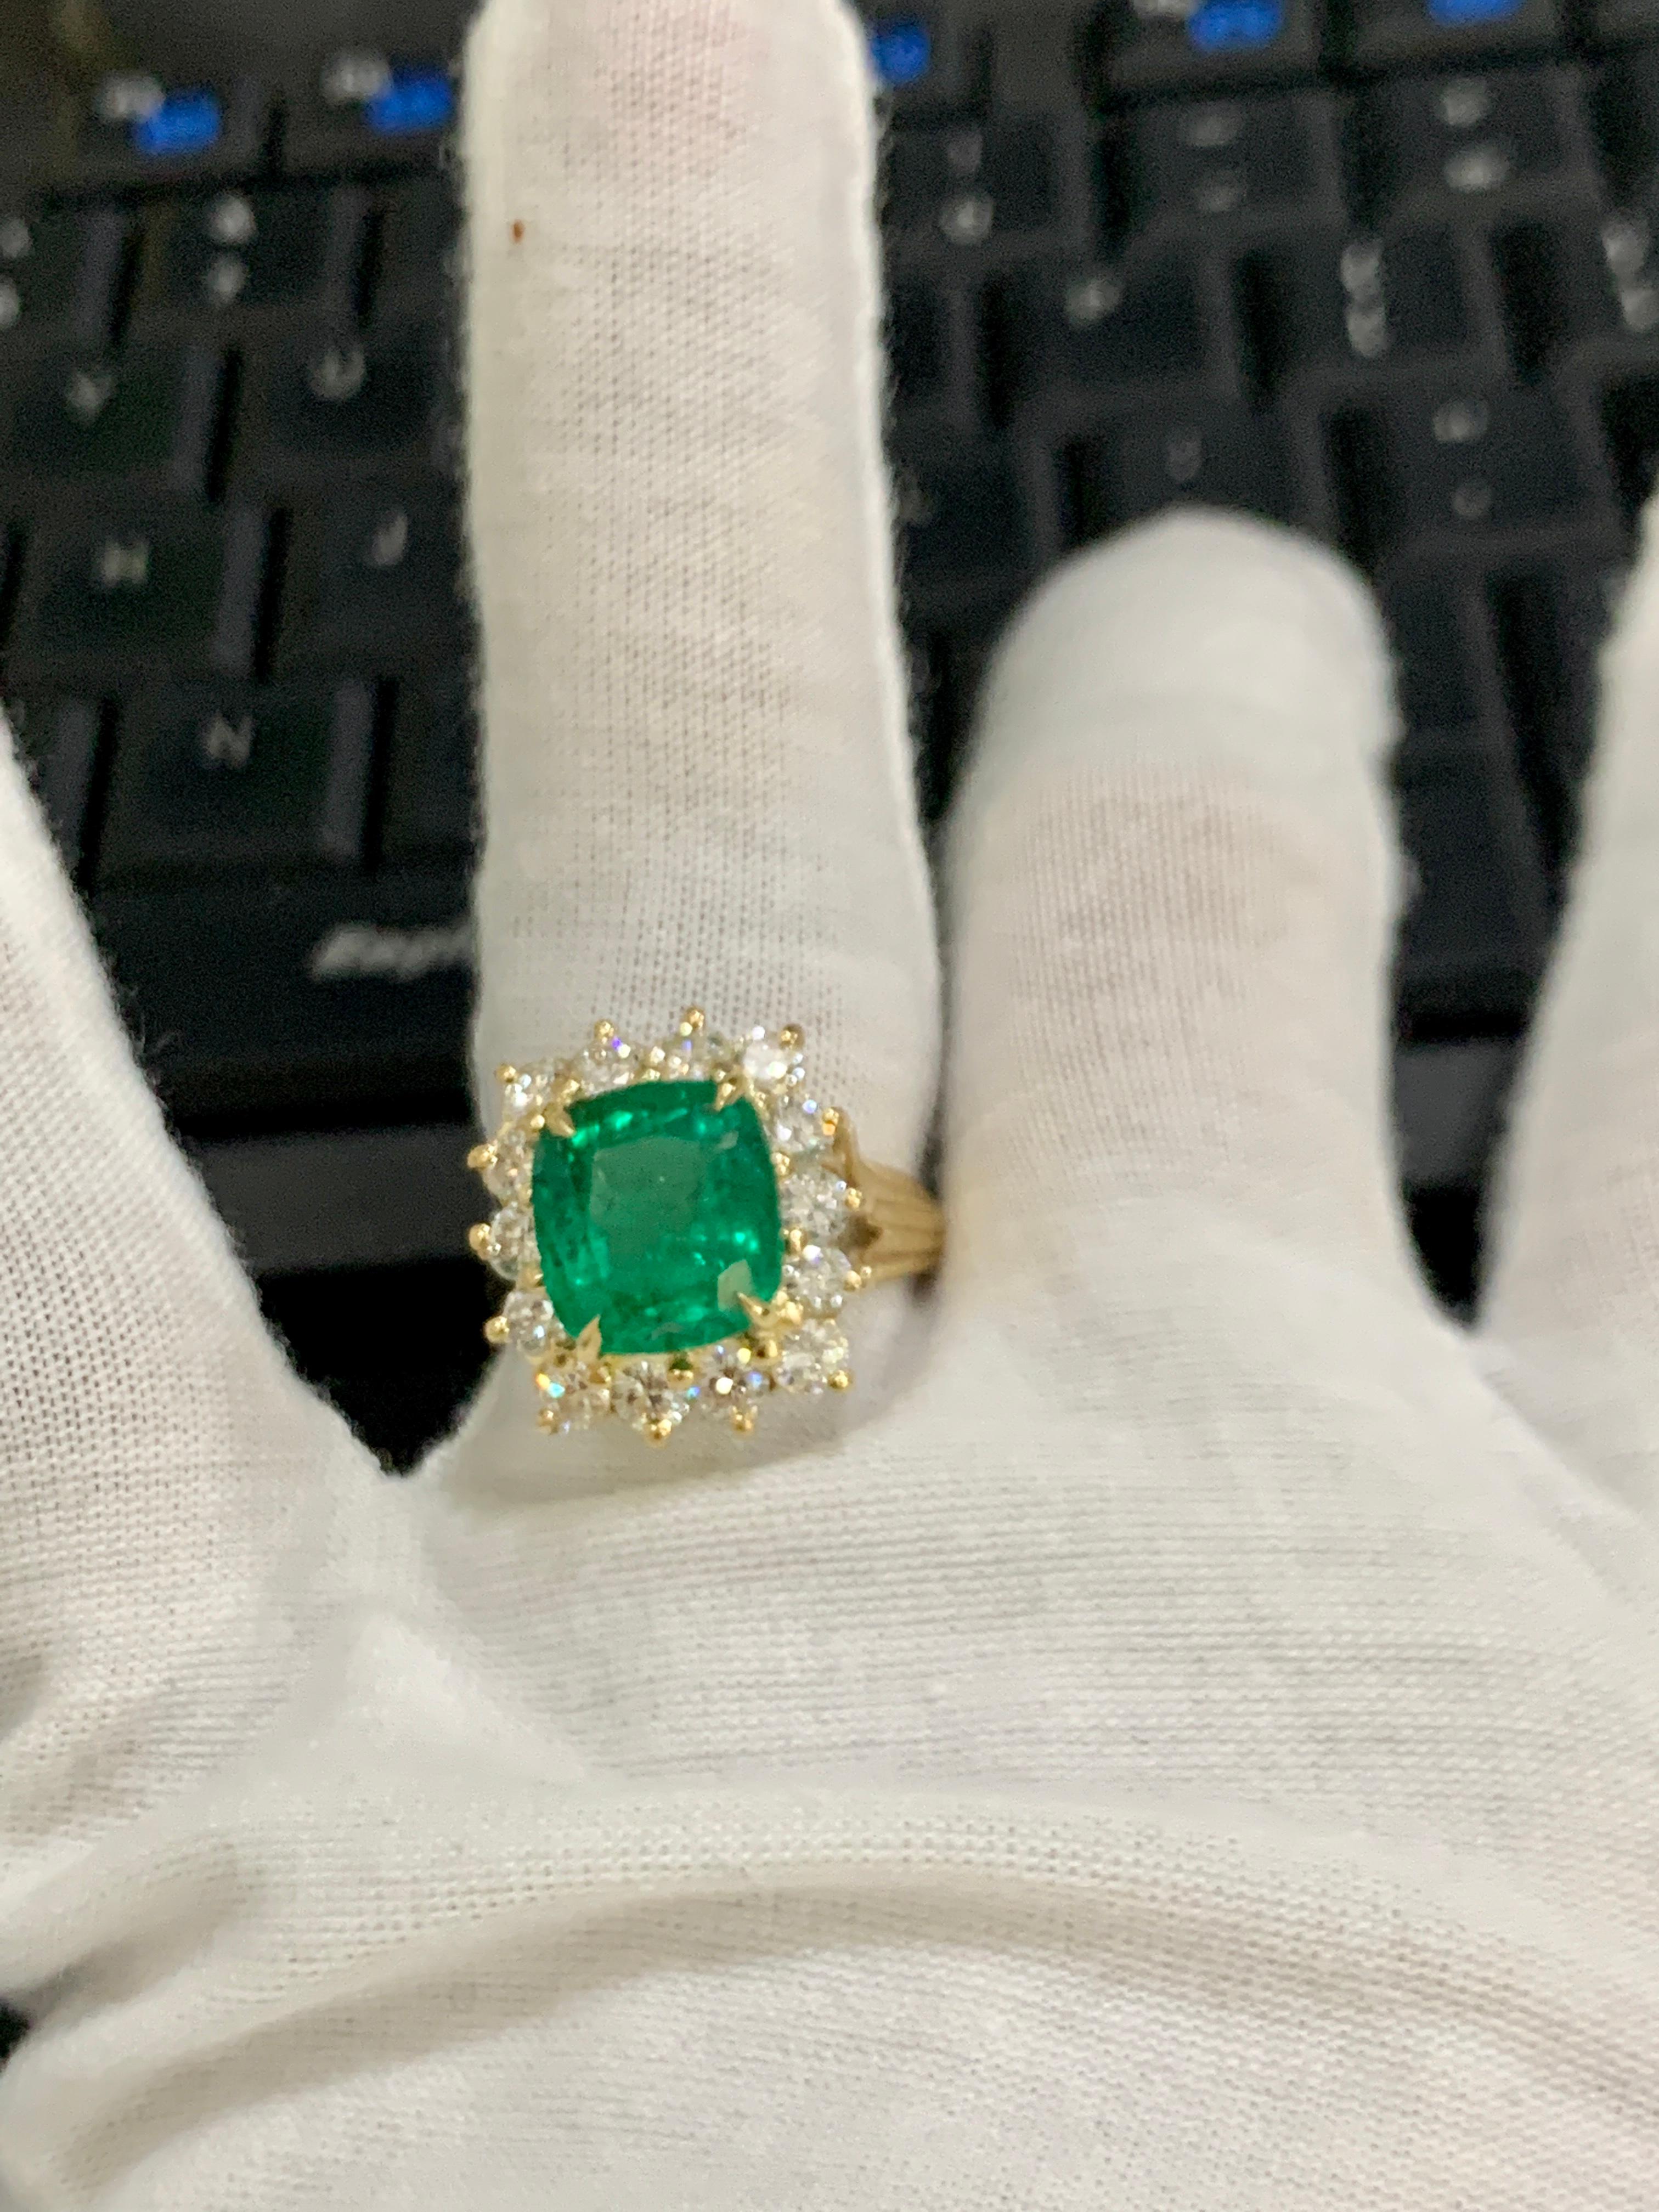 AGL Certified 4.2 Carat Cushion Cut Colombian Emerald & Diamond Ring 18K Y Gold For Sale 5